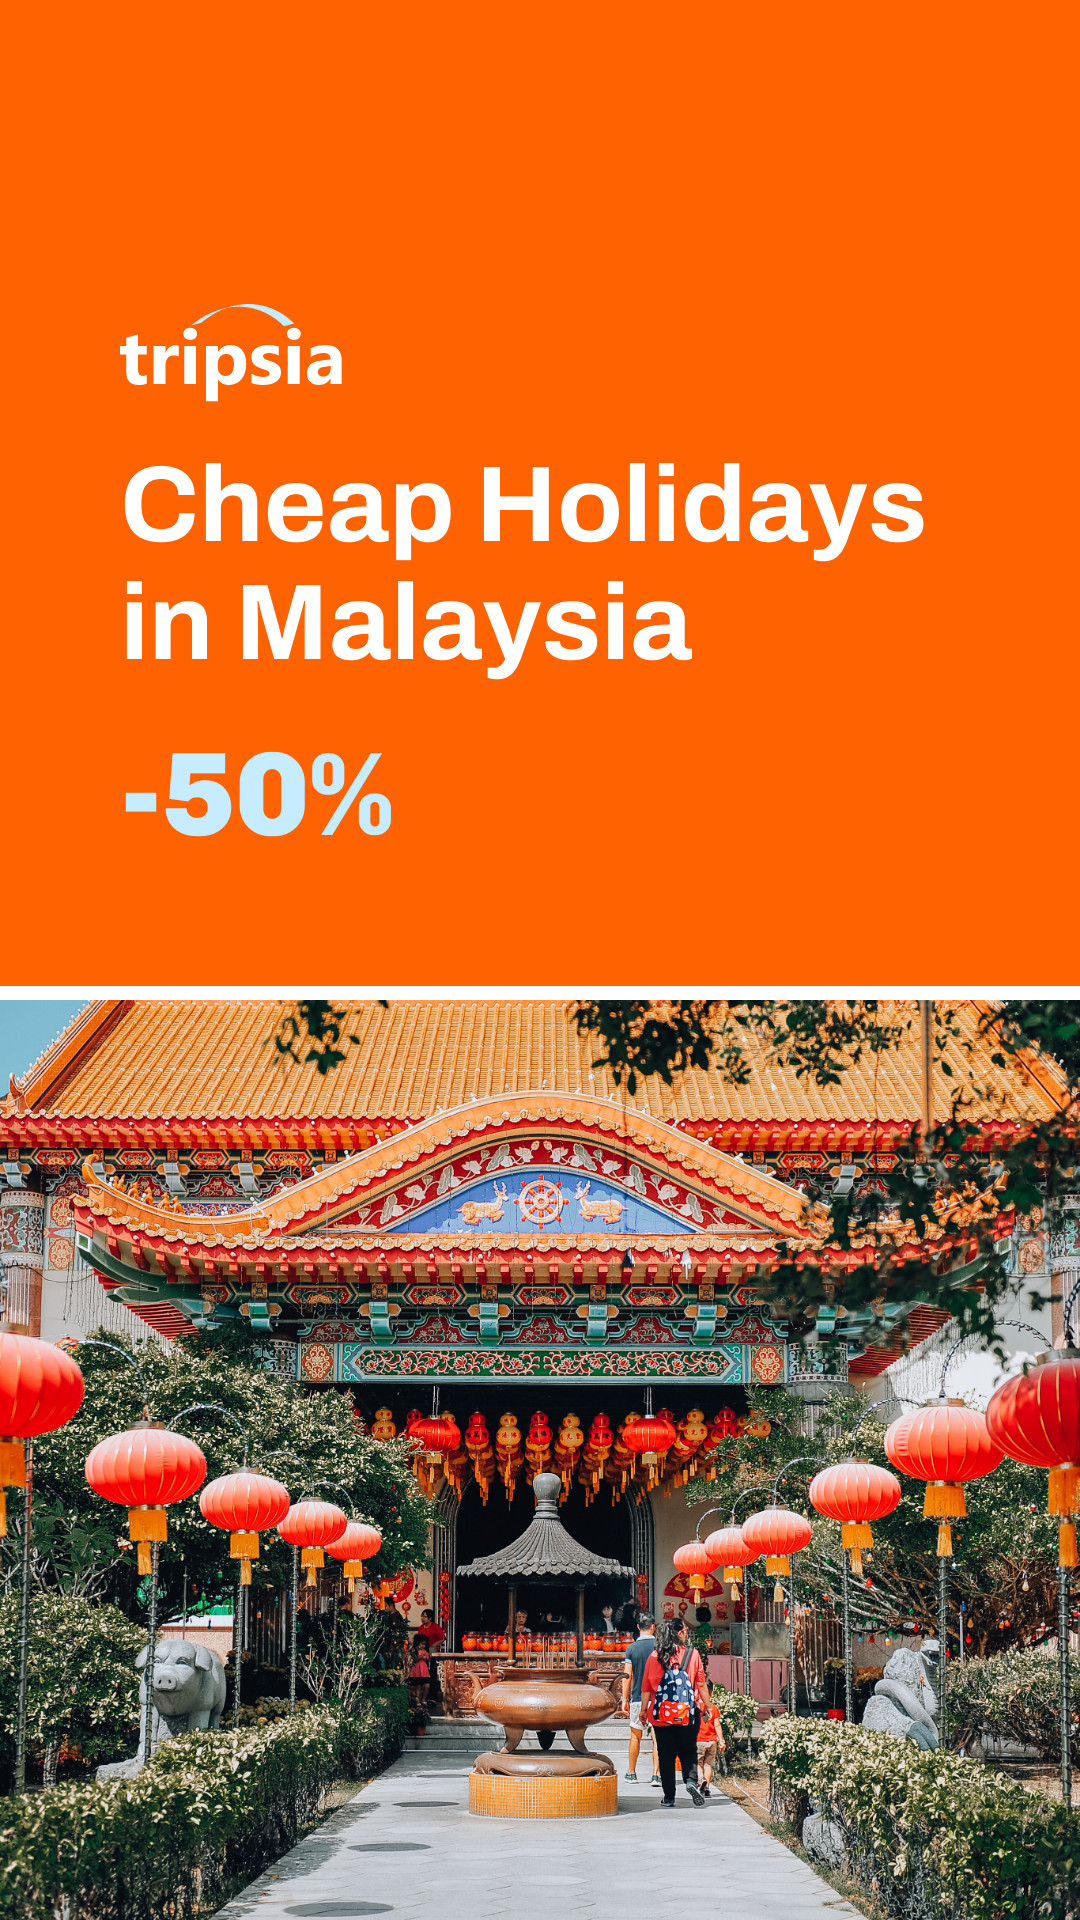 Cheap Holidays in Malaysia